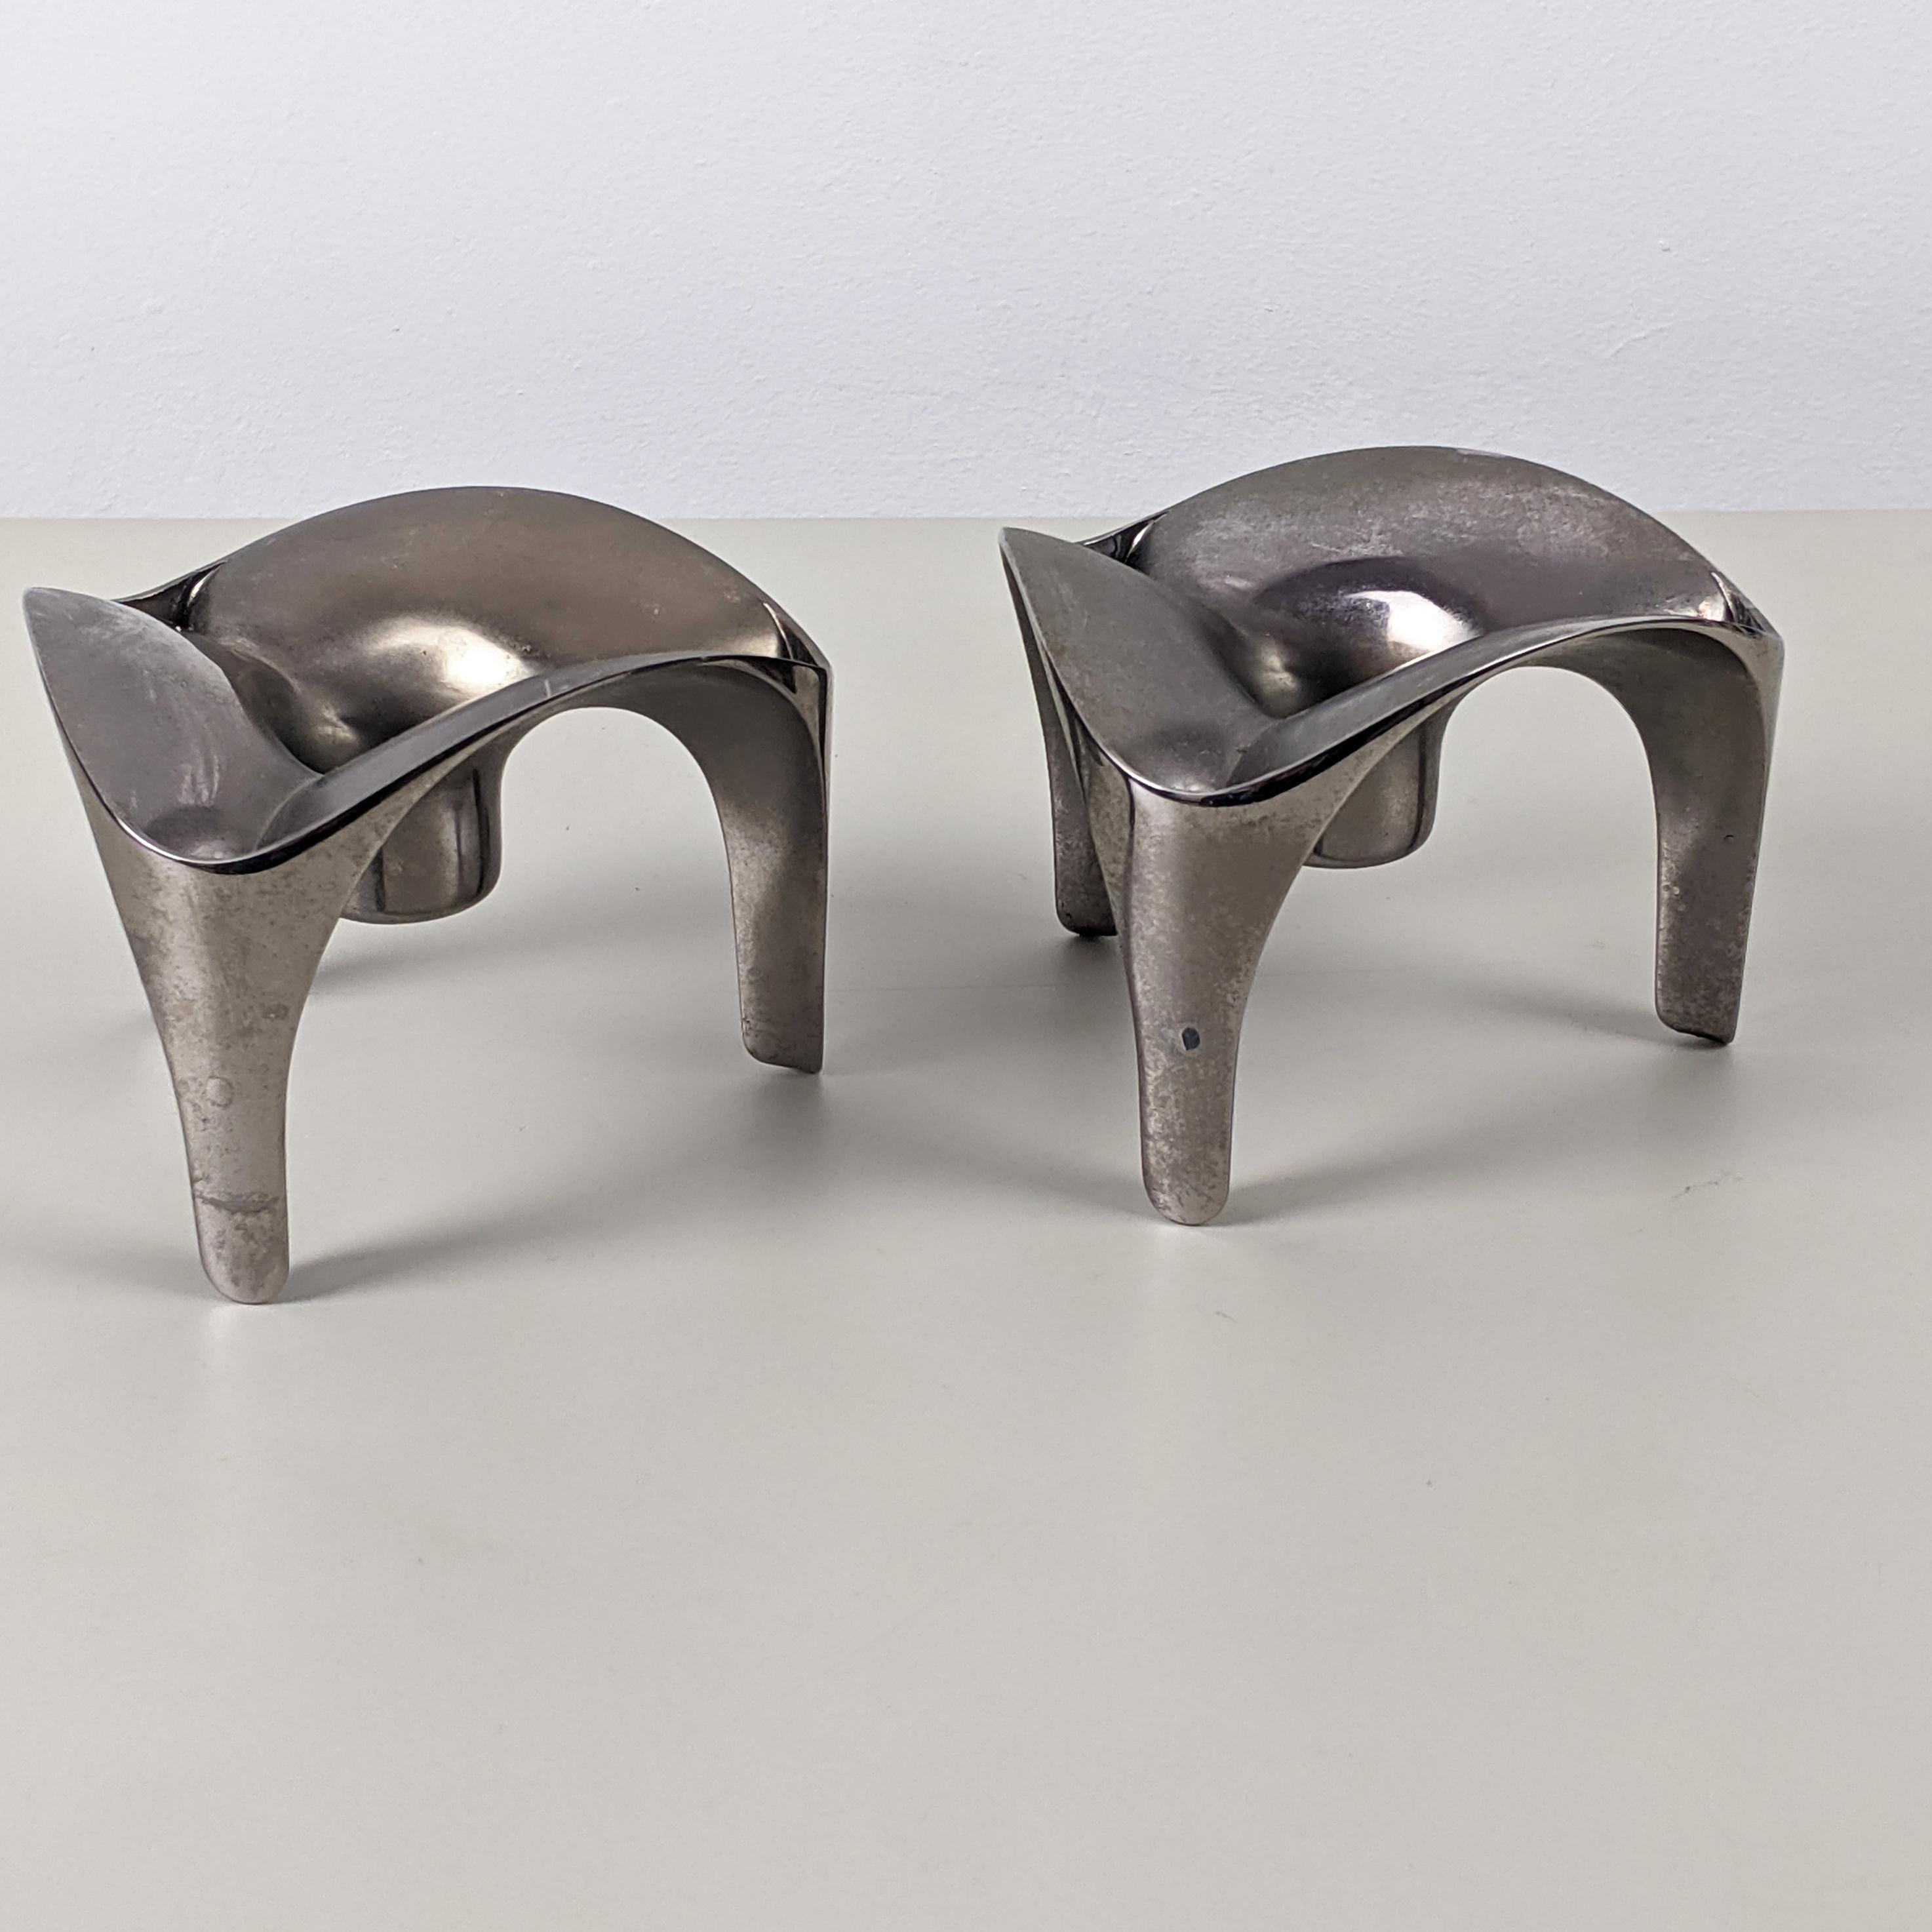 Caesar Stoffi for Nagel, Pair of Modular Stacking Elements/Candle Holders, 1970s For Sale 1